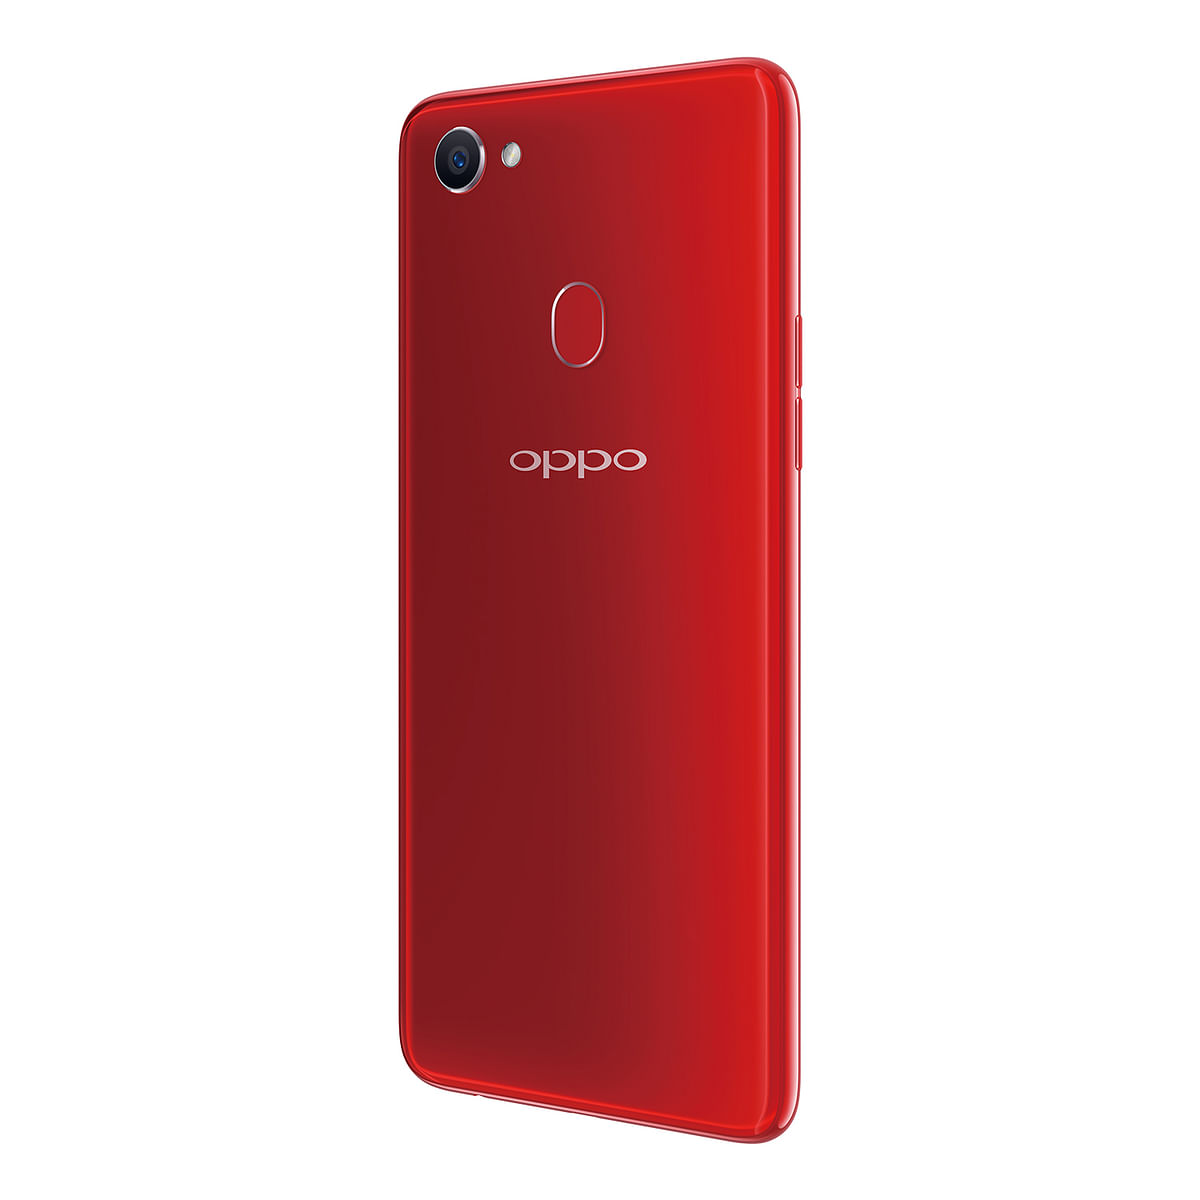 Attention selfie lovers, OPPO has answered your prayers.